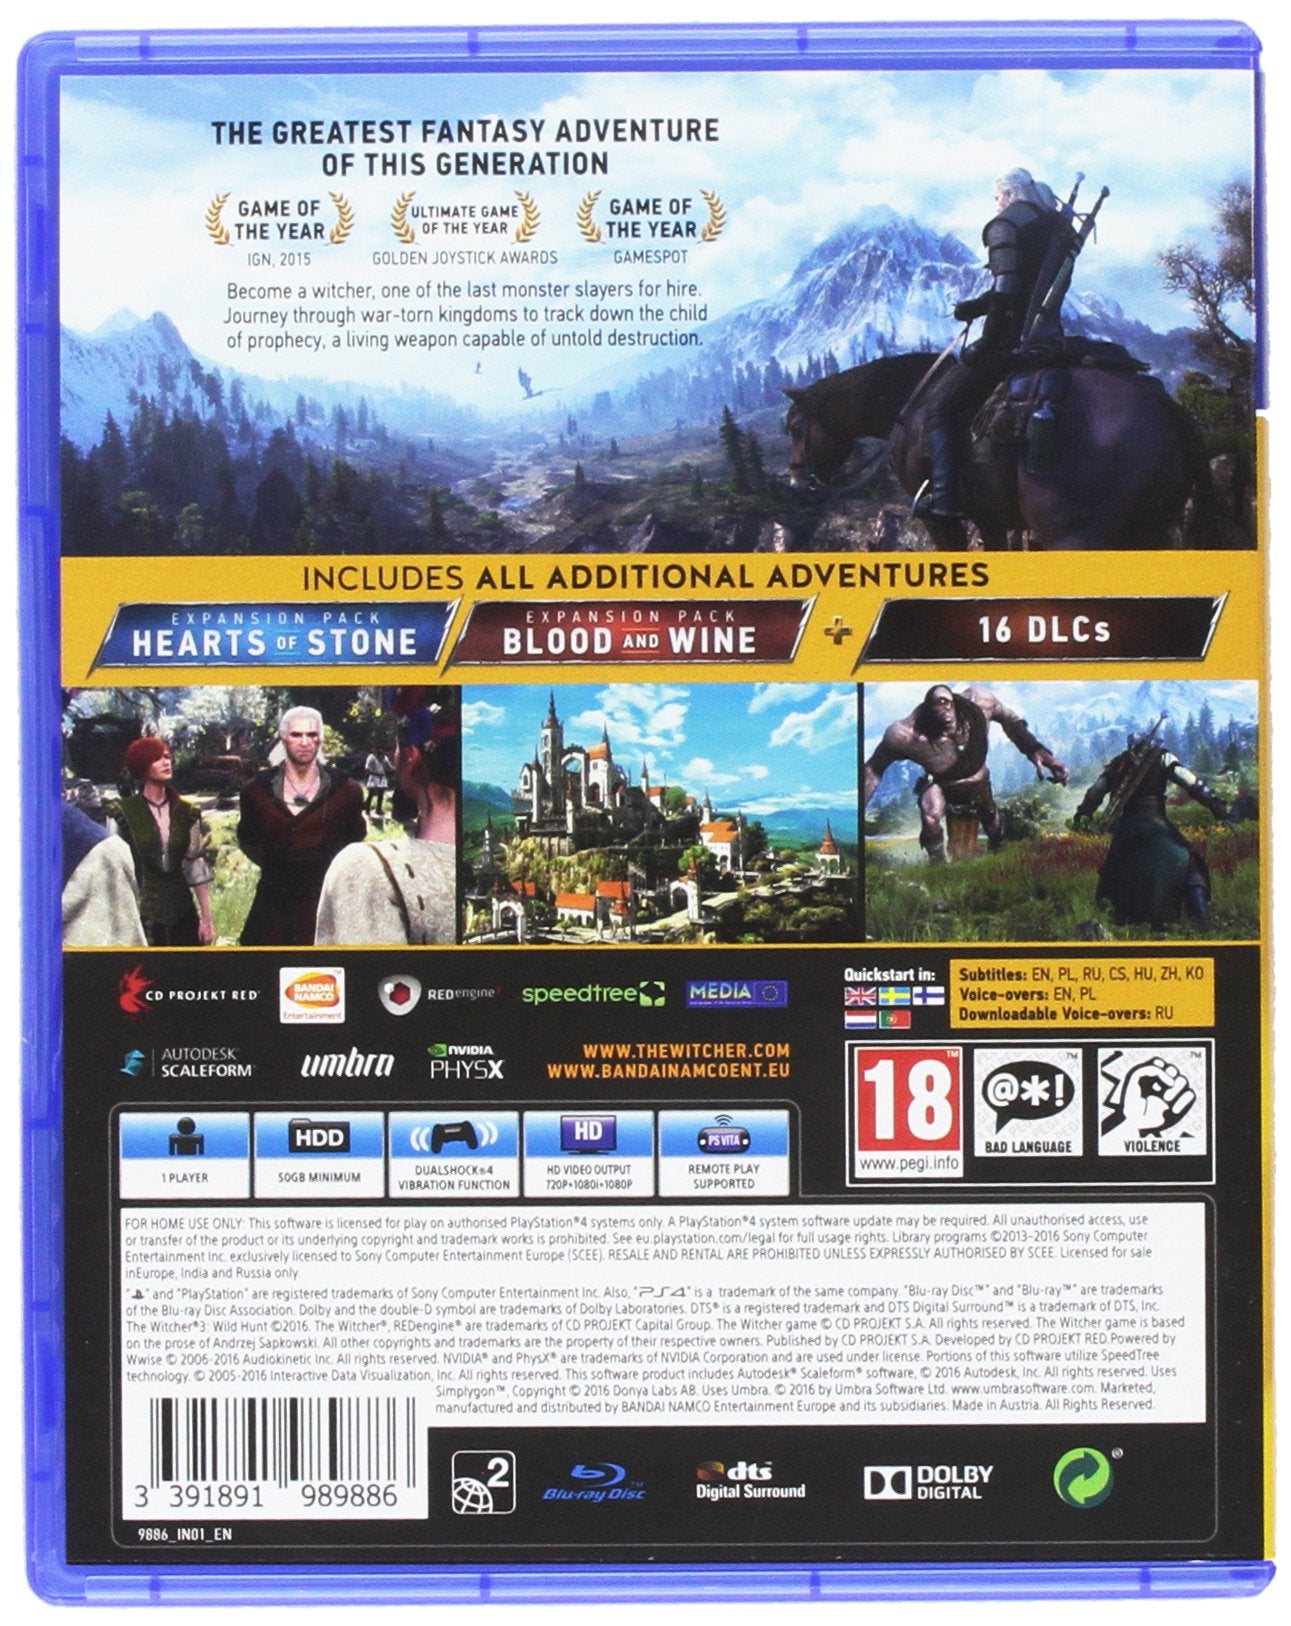 The Witcher 3 Wild Hunt Game Of The Year (GOTY) PS4